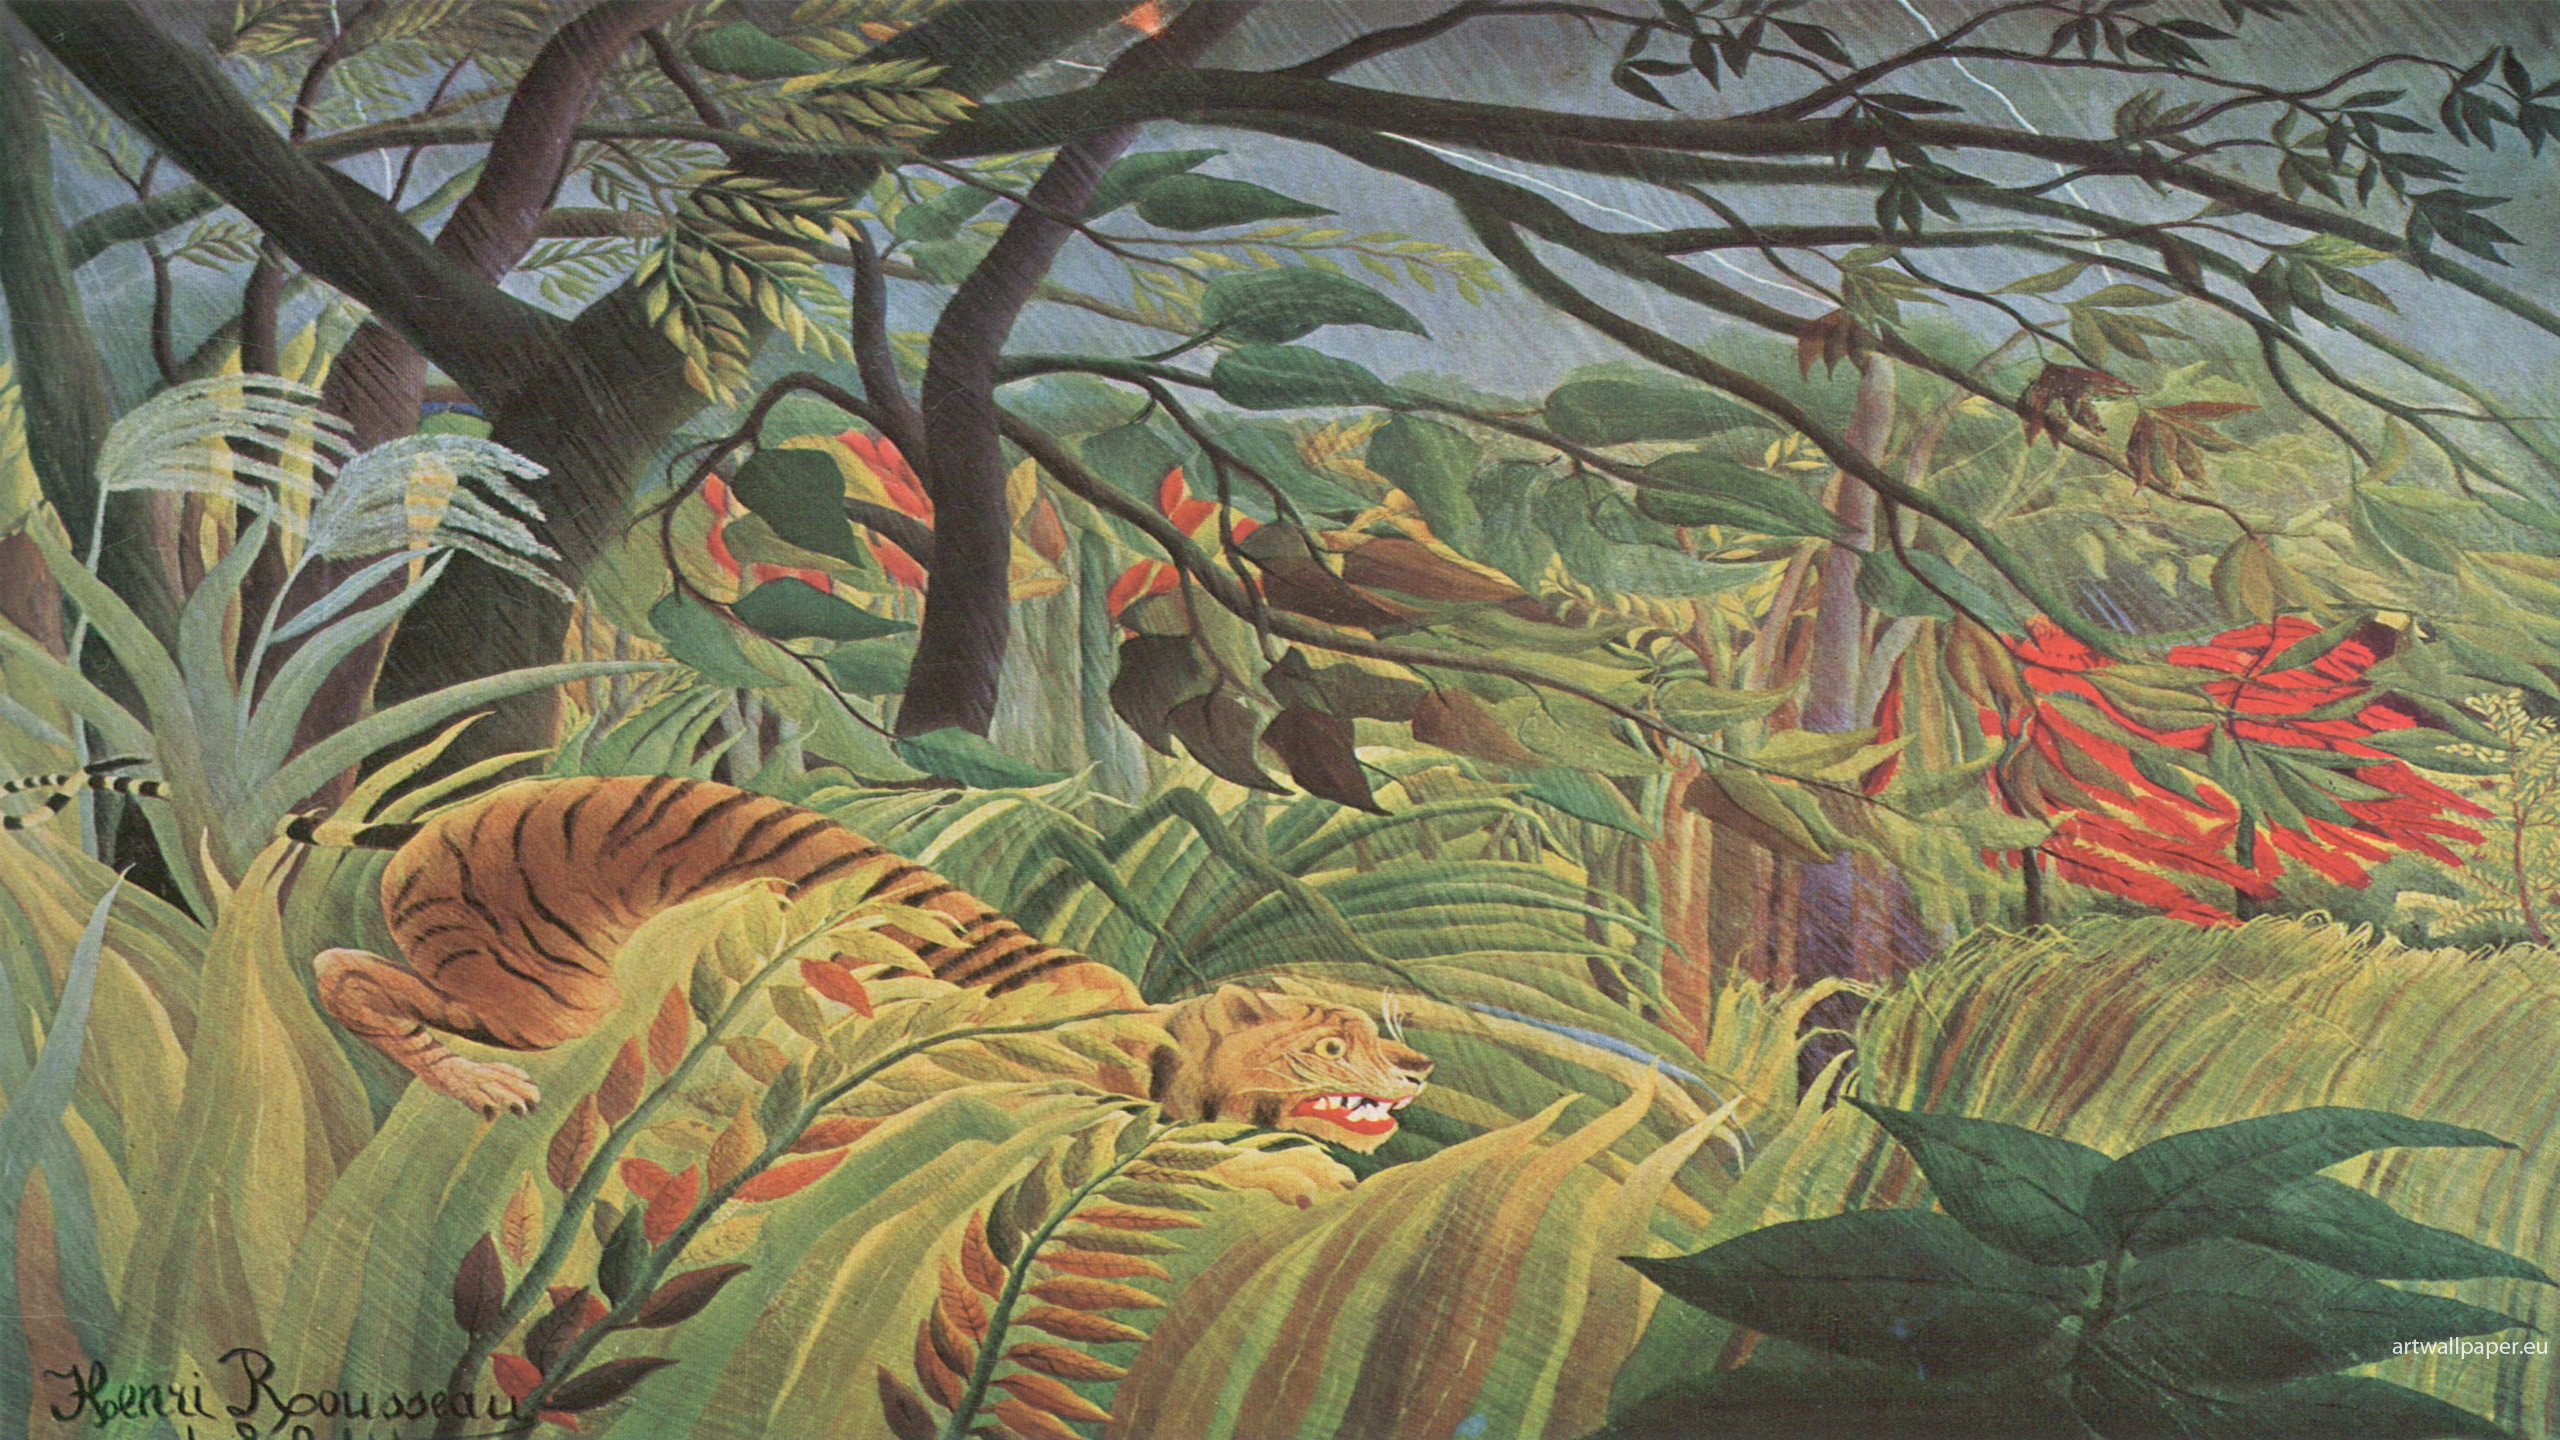 2560x1440 Tiger in a Tropical Storm, Henri Rousseau - Wall Mural & Photo .